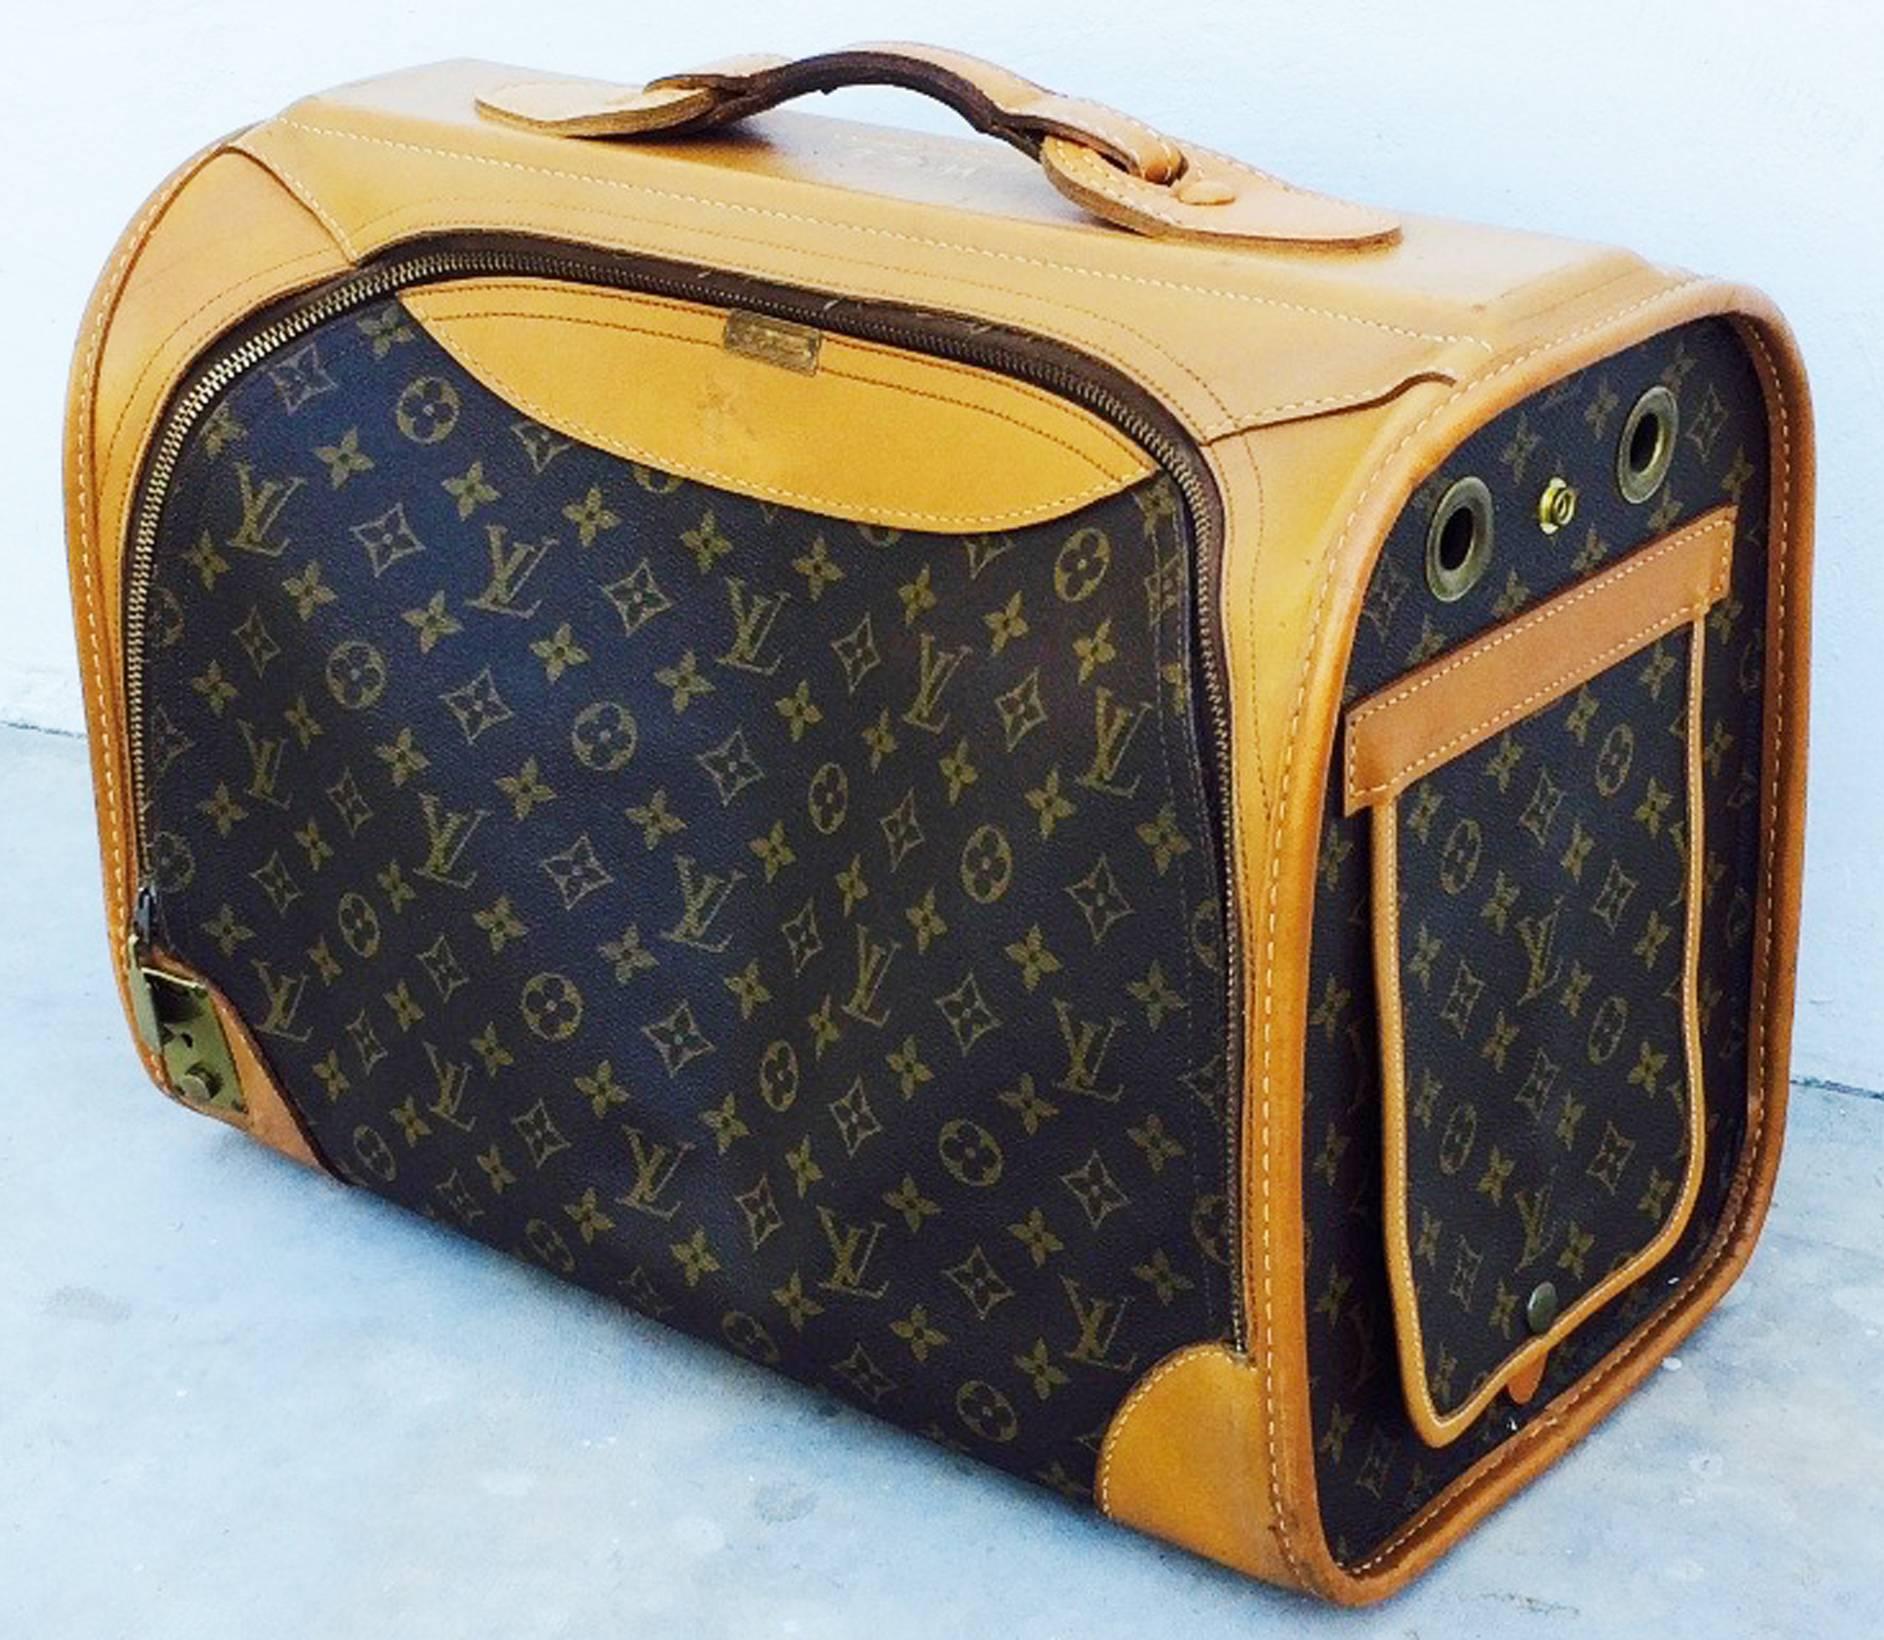 William de Lillo's Louis Vuitton sac chien dog carrier case. Authentic logo canvas item trimmed in leather with brass hardware and glides. Vinyl lined interior features a zipper closure, rolling mesh window and air vents. Item monogramed for Mr. de